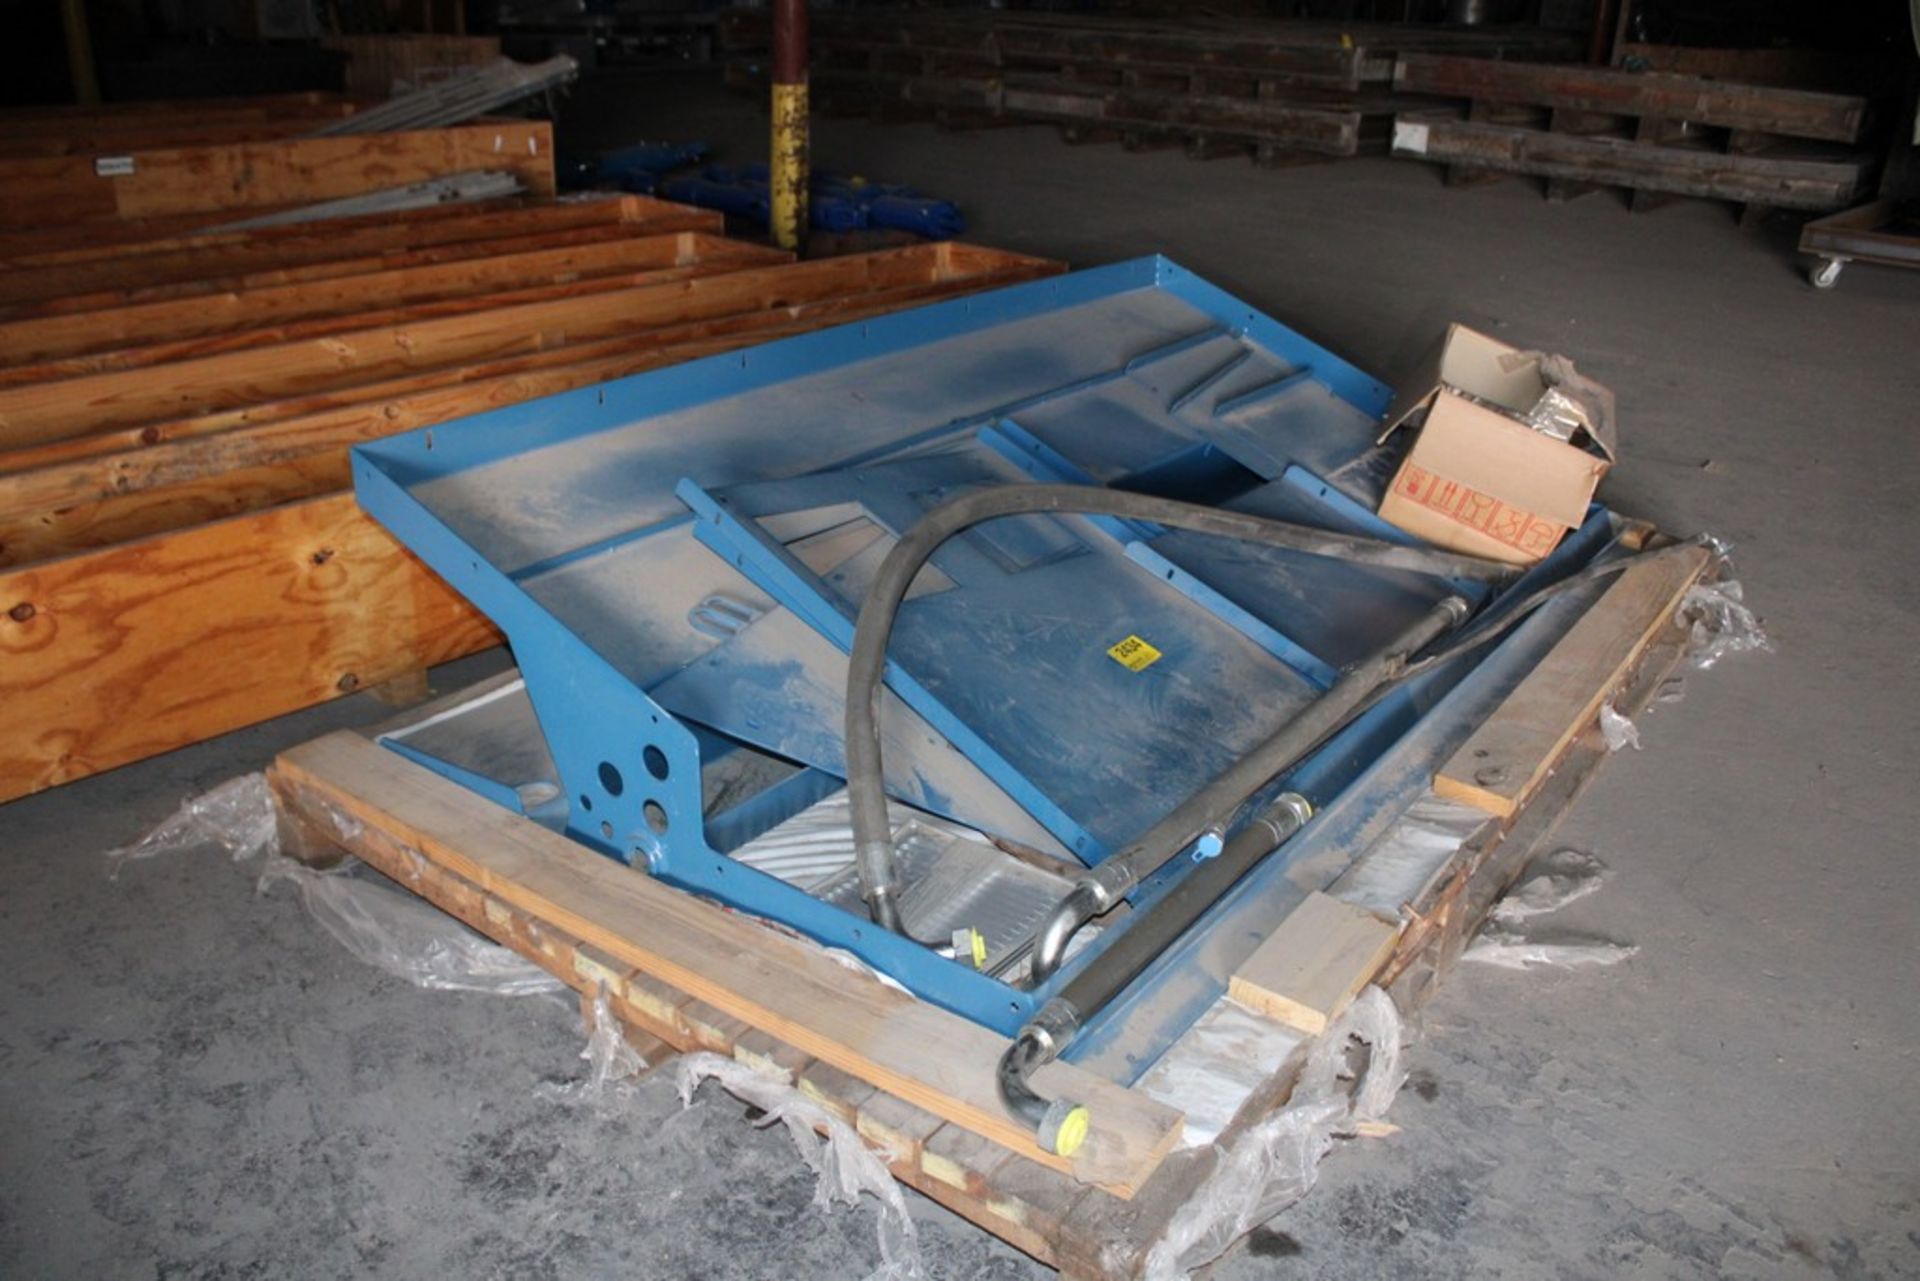 COOLING FAN HOUSING PARTS ON SKID